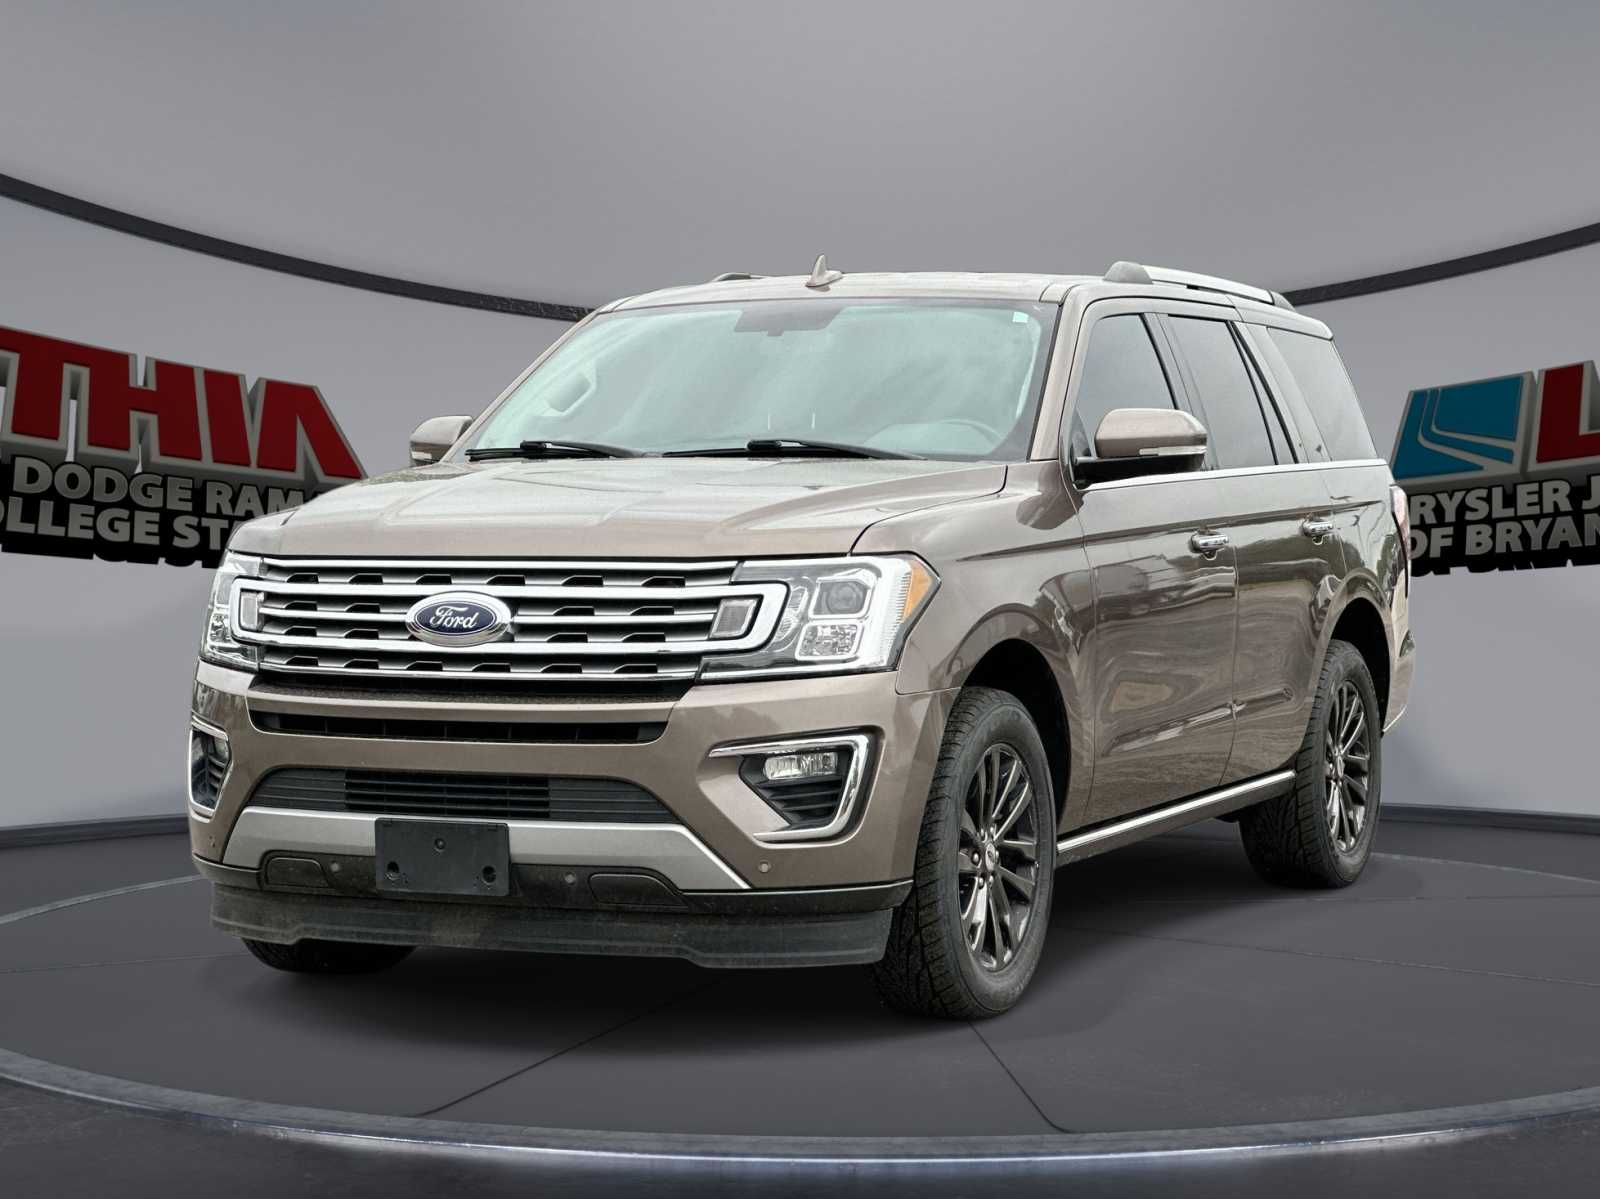 2019 Ford Expedition Limited Hero Image